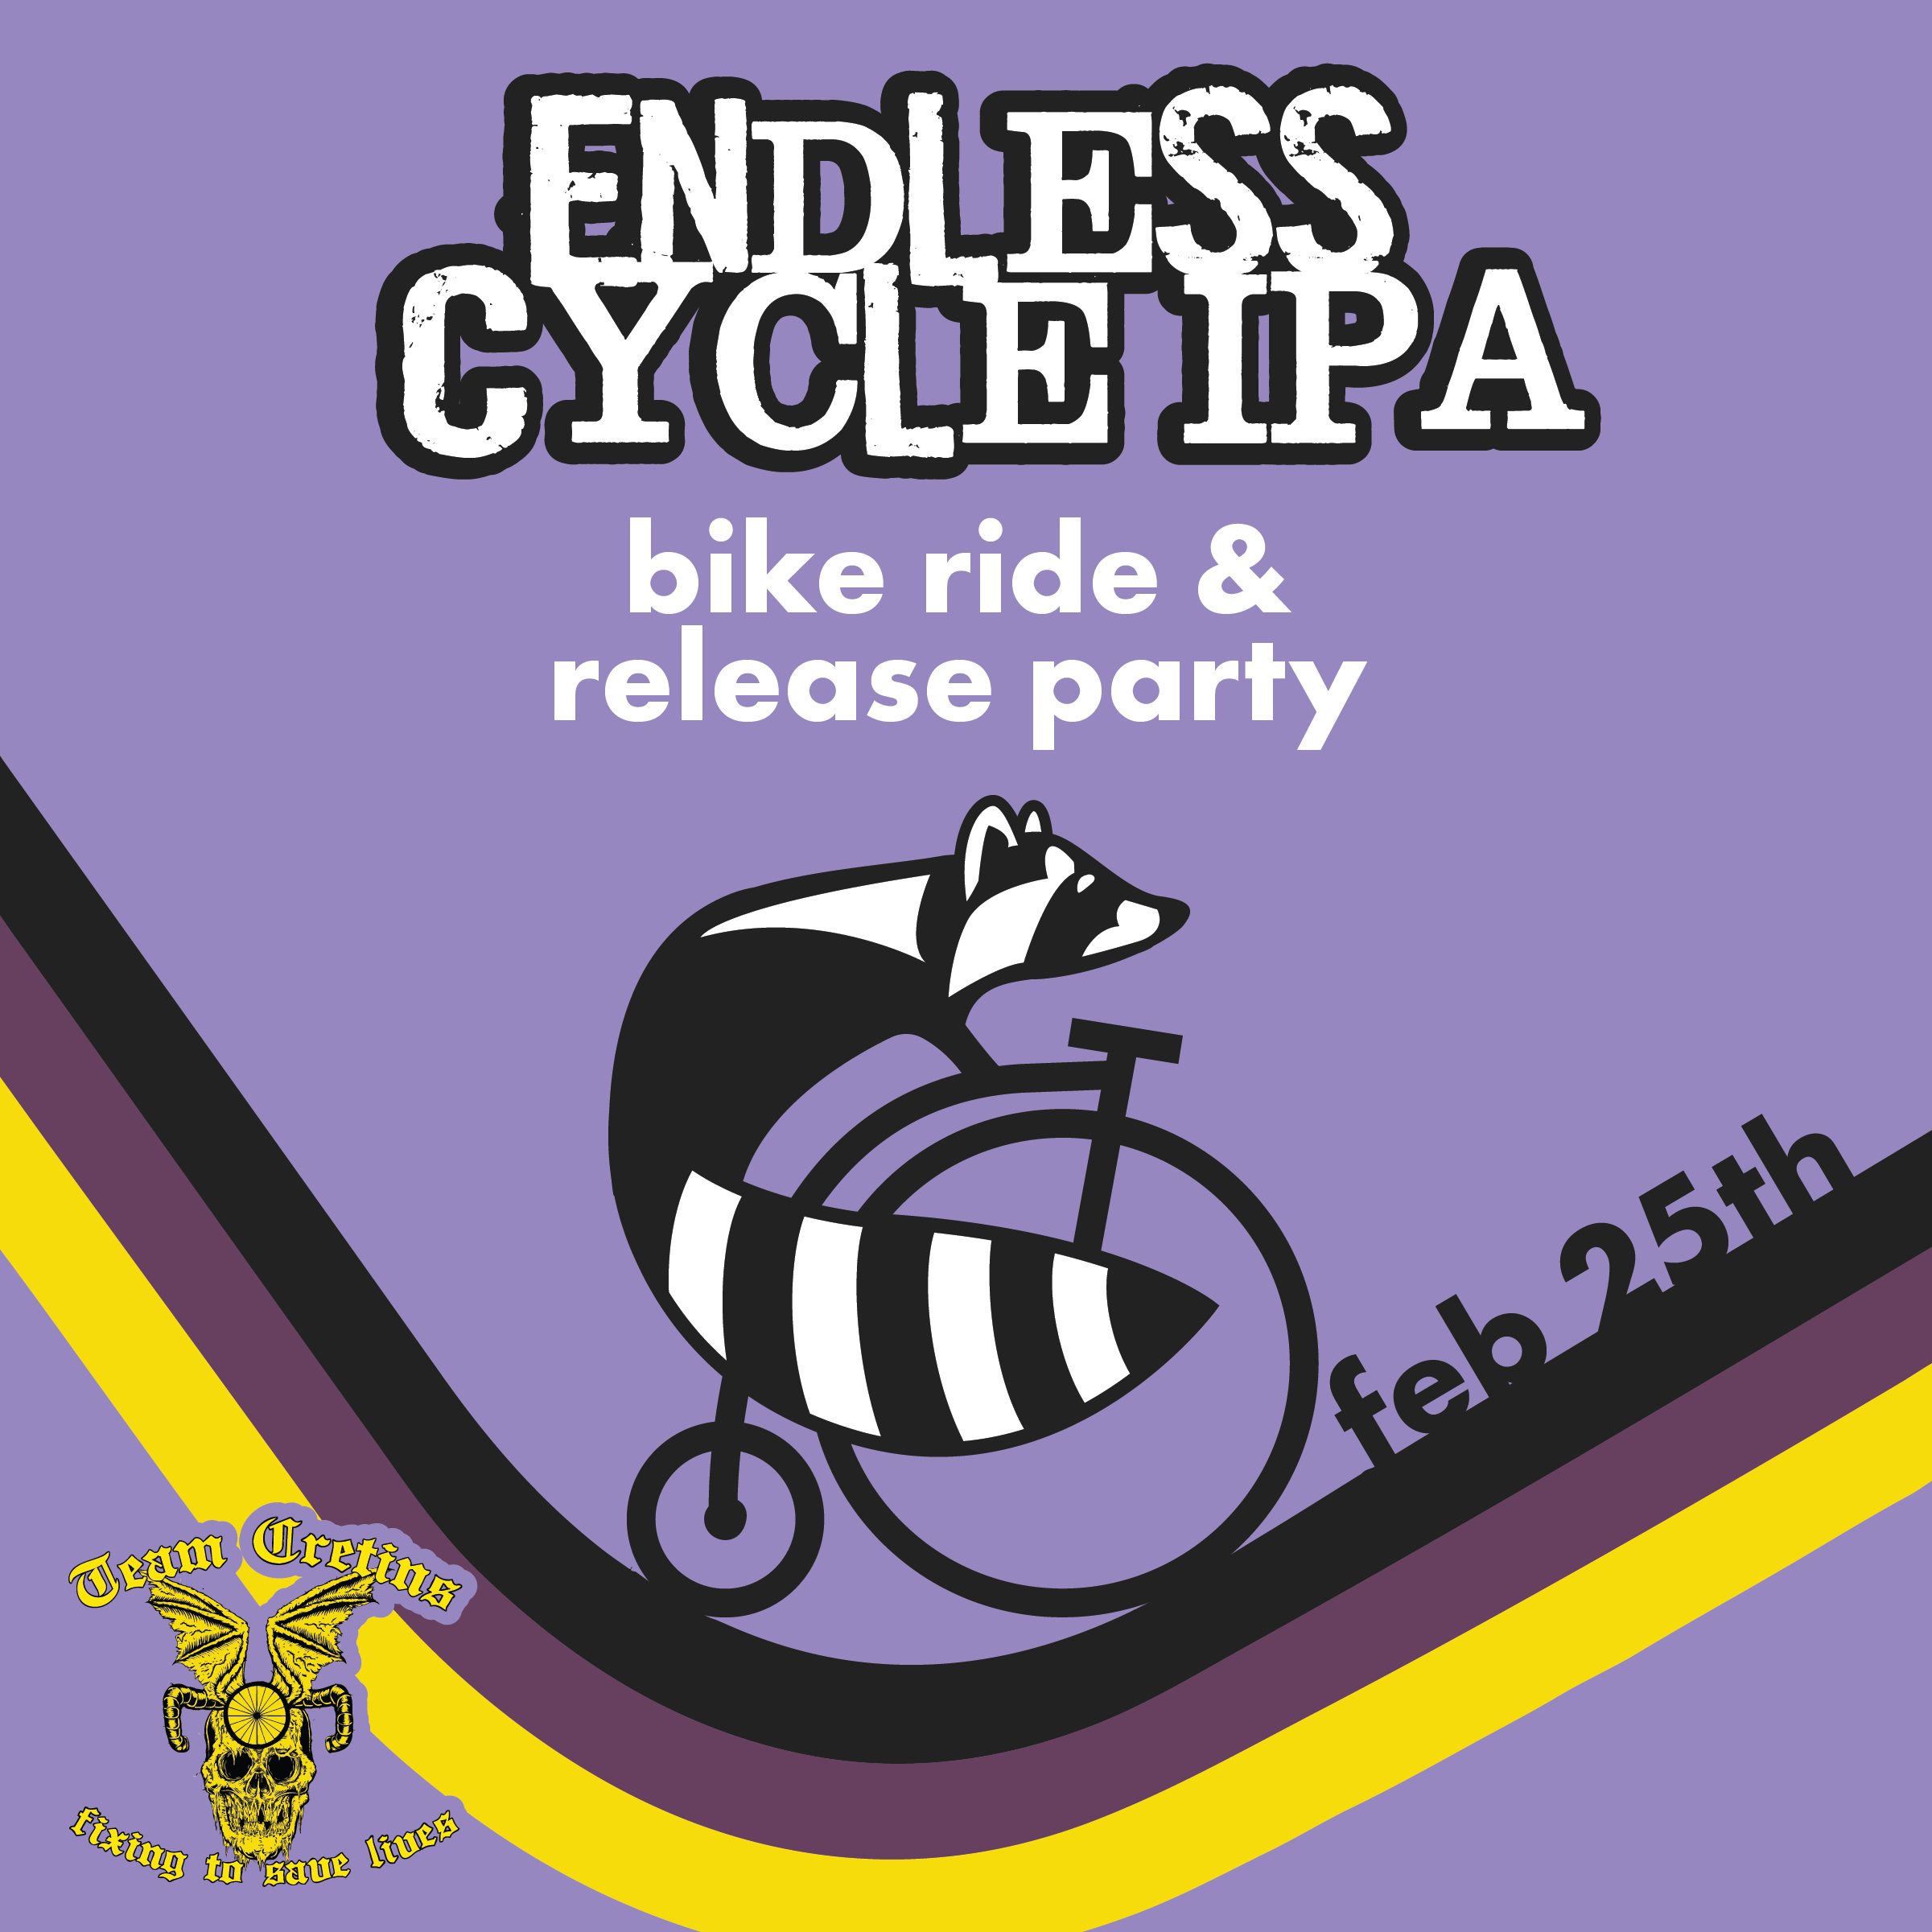 graphic for endless cycle ipa beer release with purple background and raccoon logo on a bike